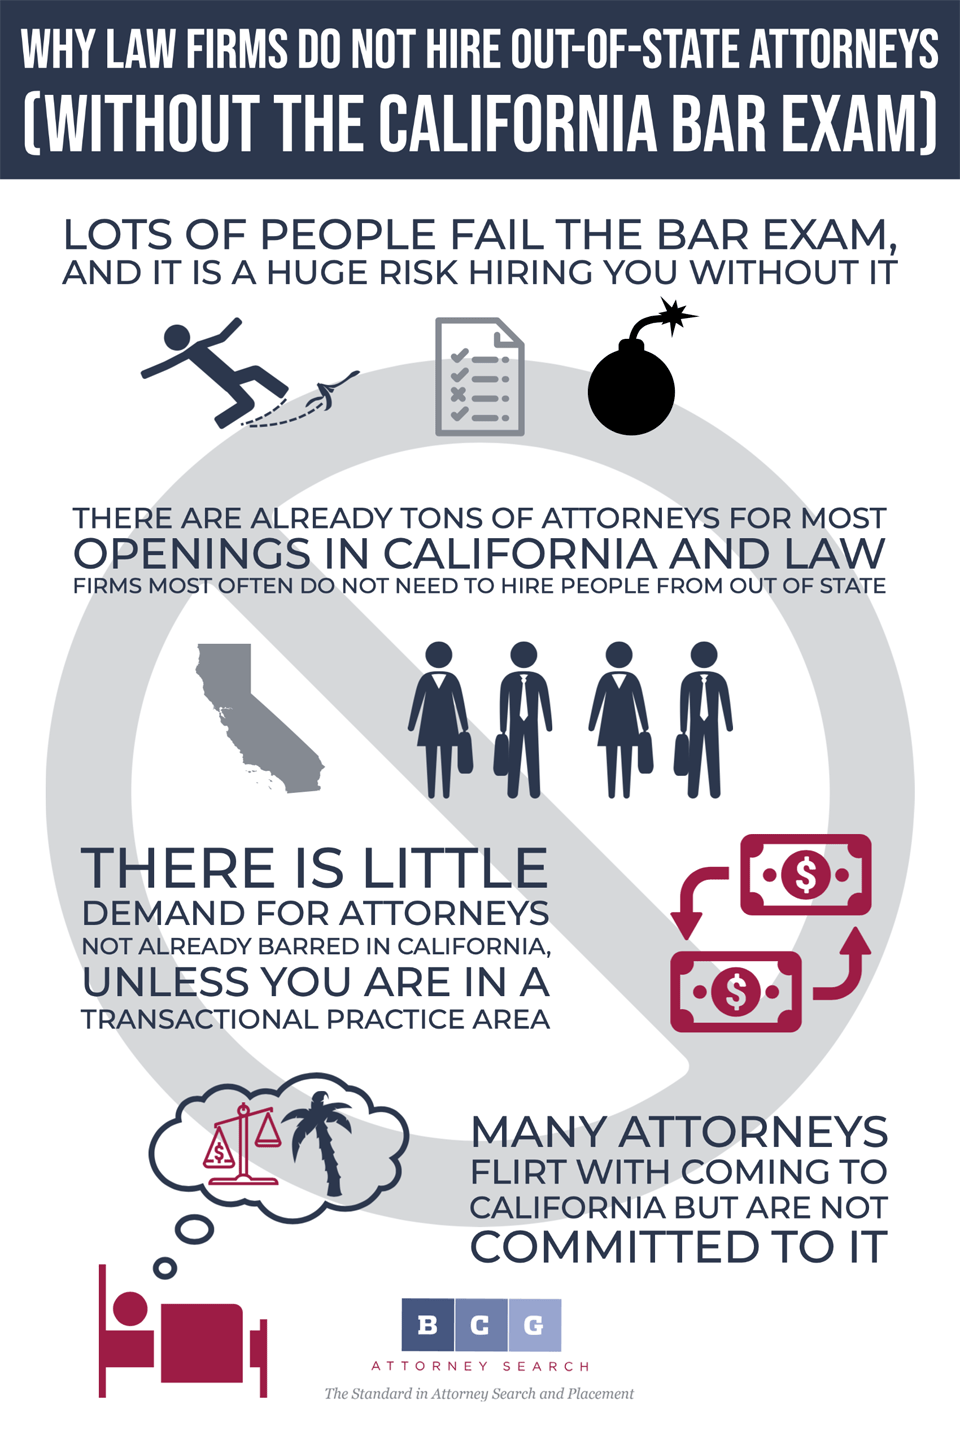 Will a Law Firm in California Hire Attorneys Without the California Bar? |  